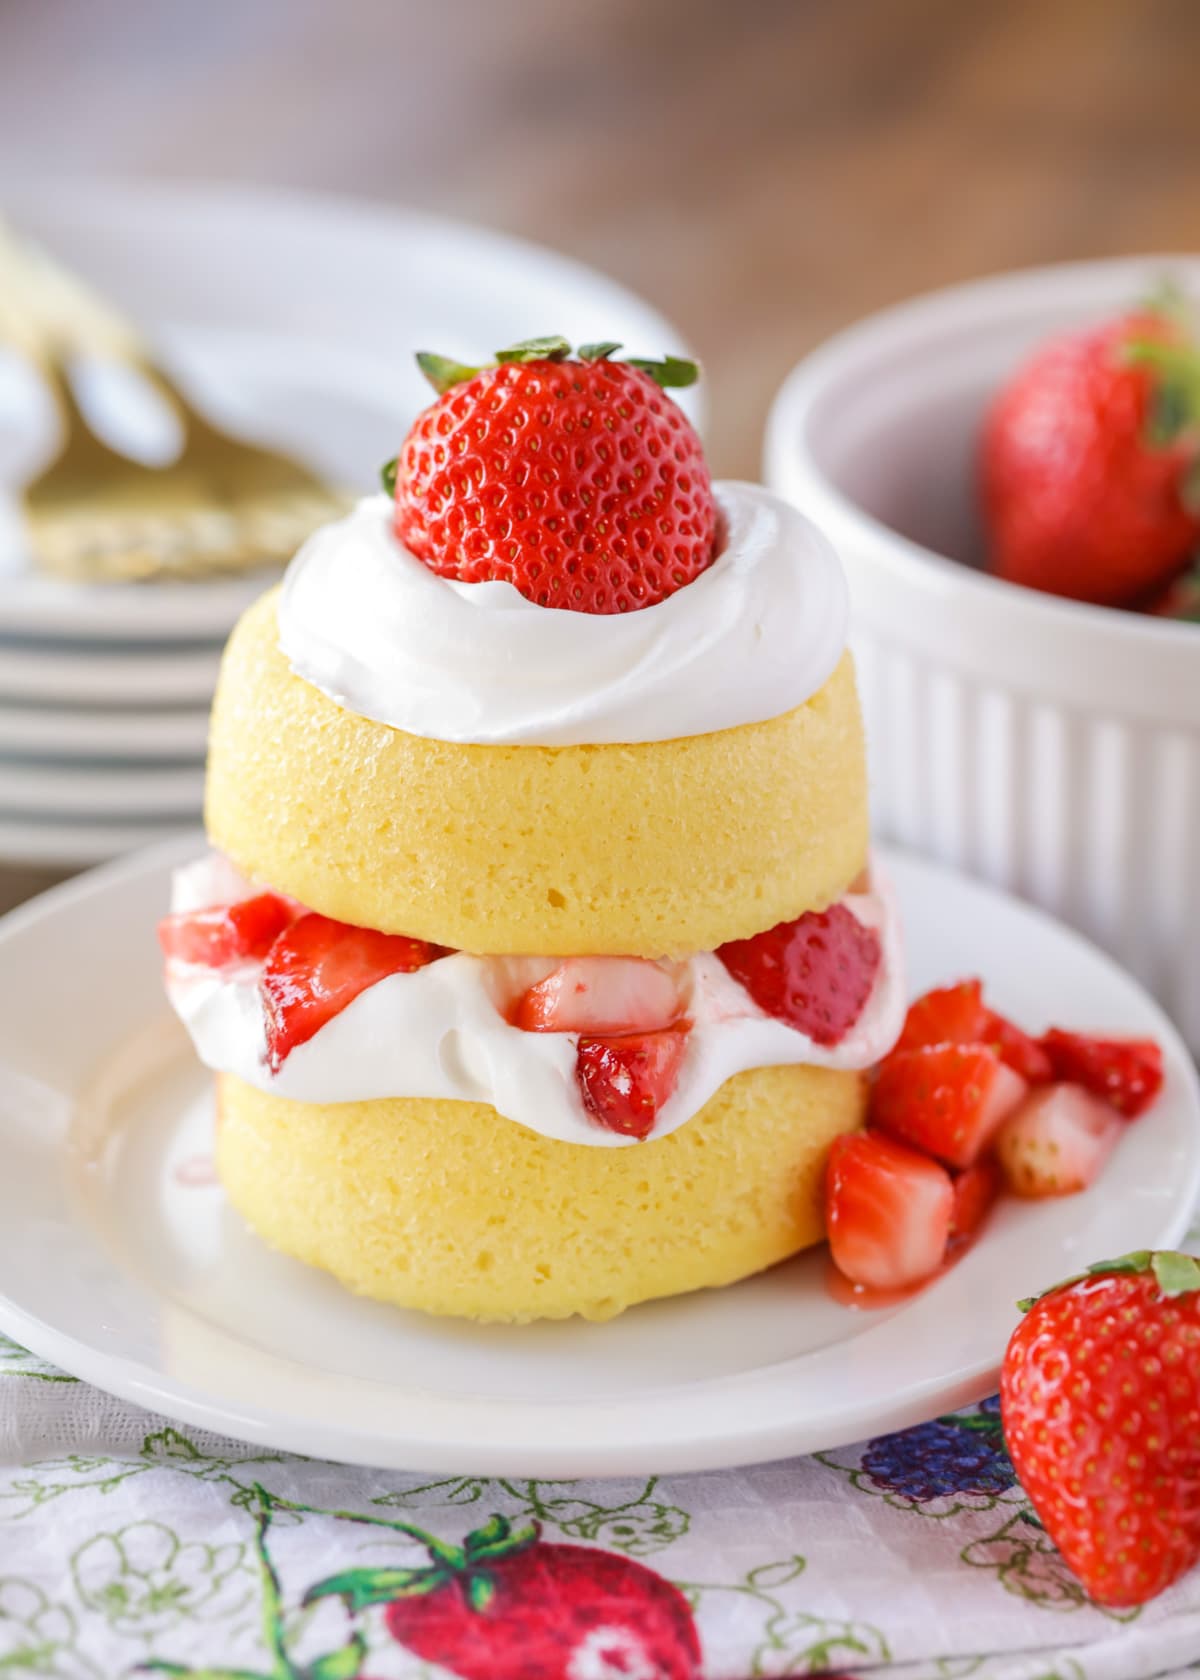 Easy strawberry shortcake topped with whipped cream and strawberries on a white plate.